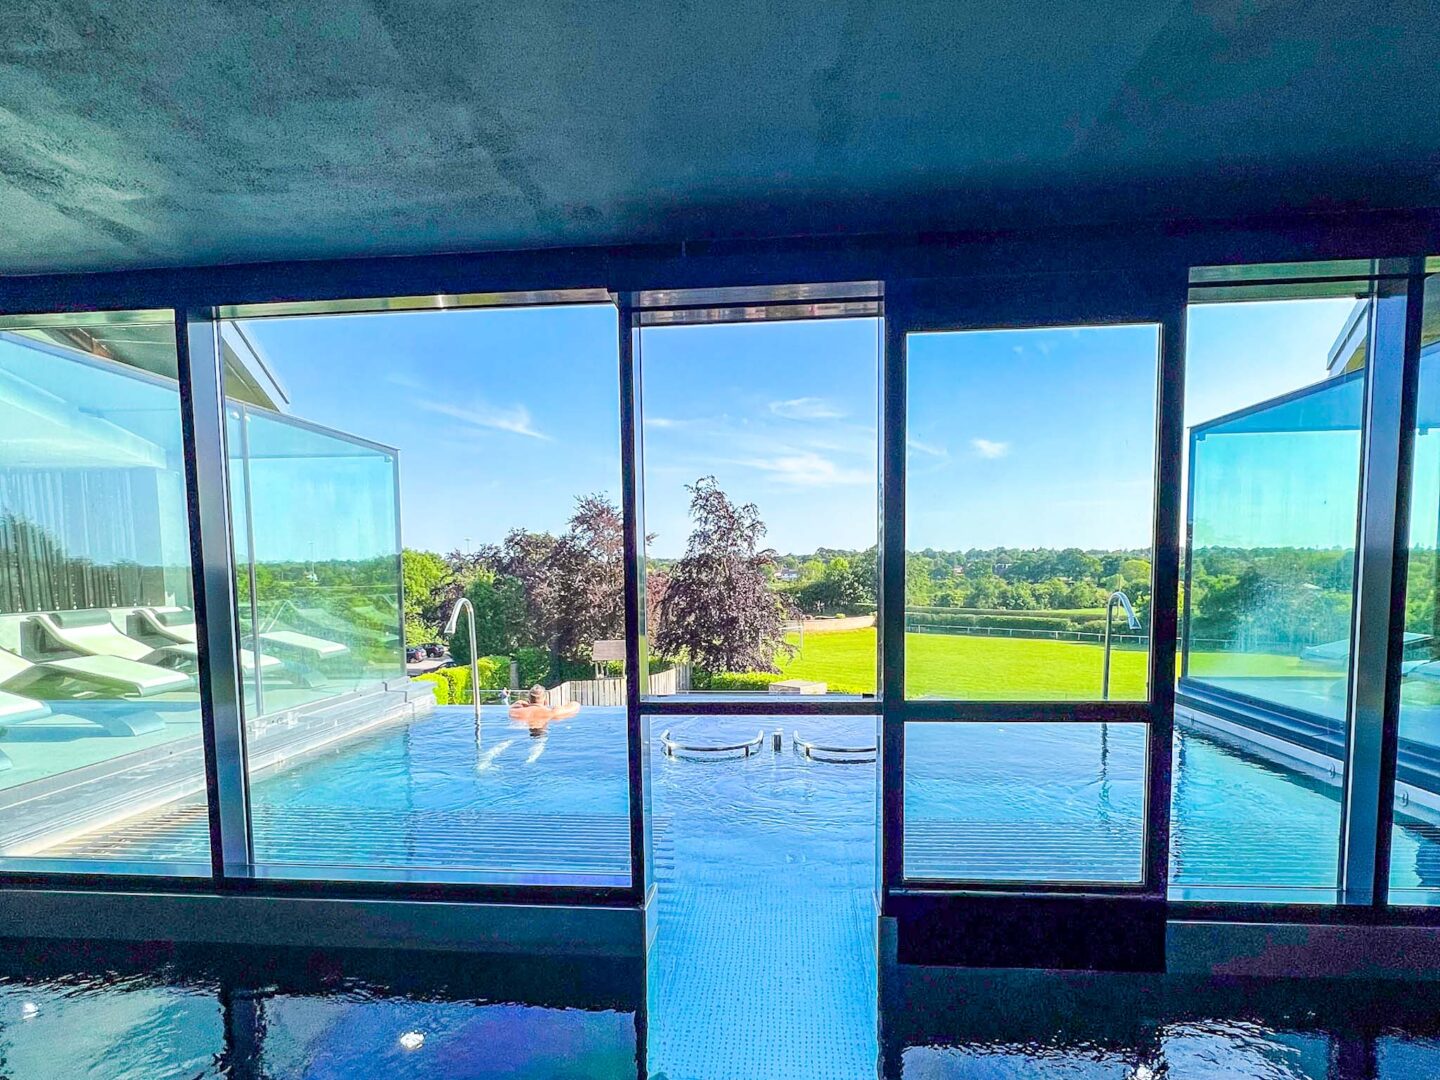 Things to do near Manchester Airport, infinity pool at Hale Country Club and Spa